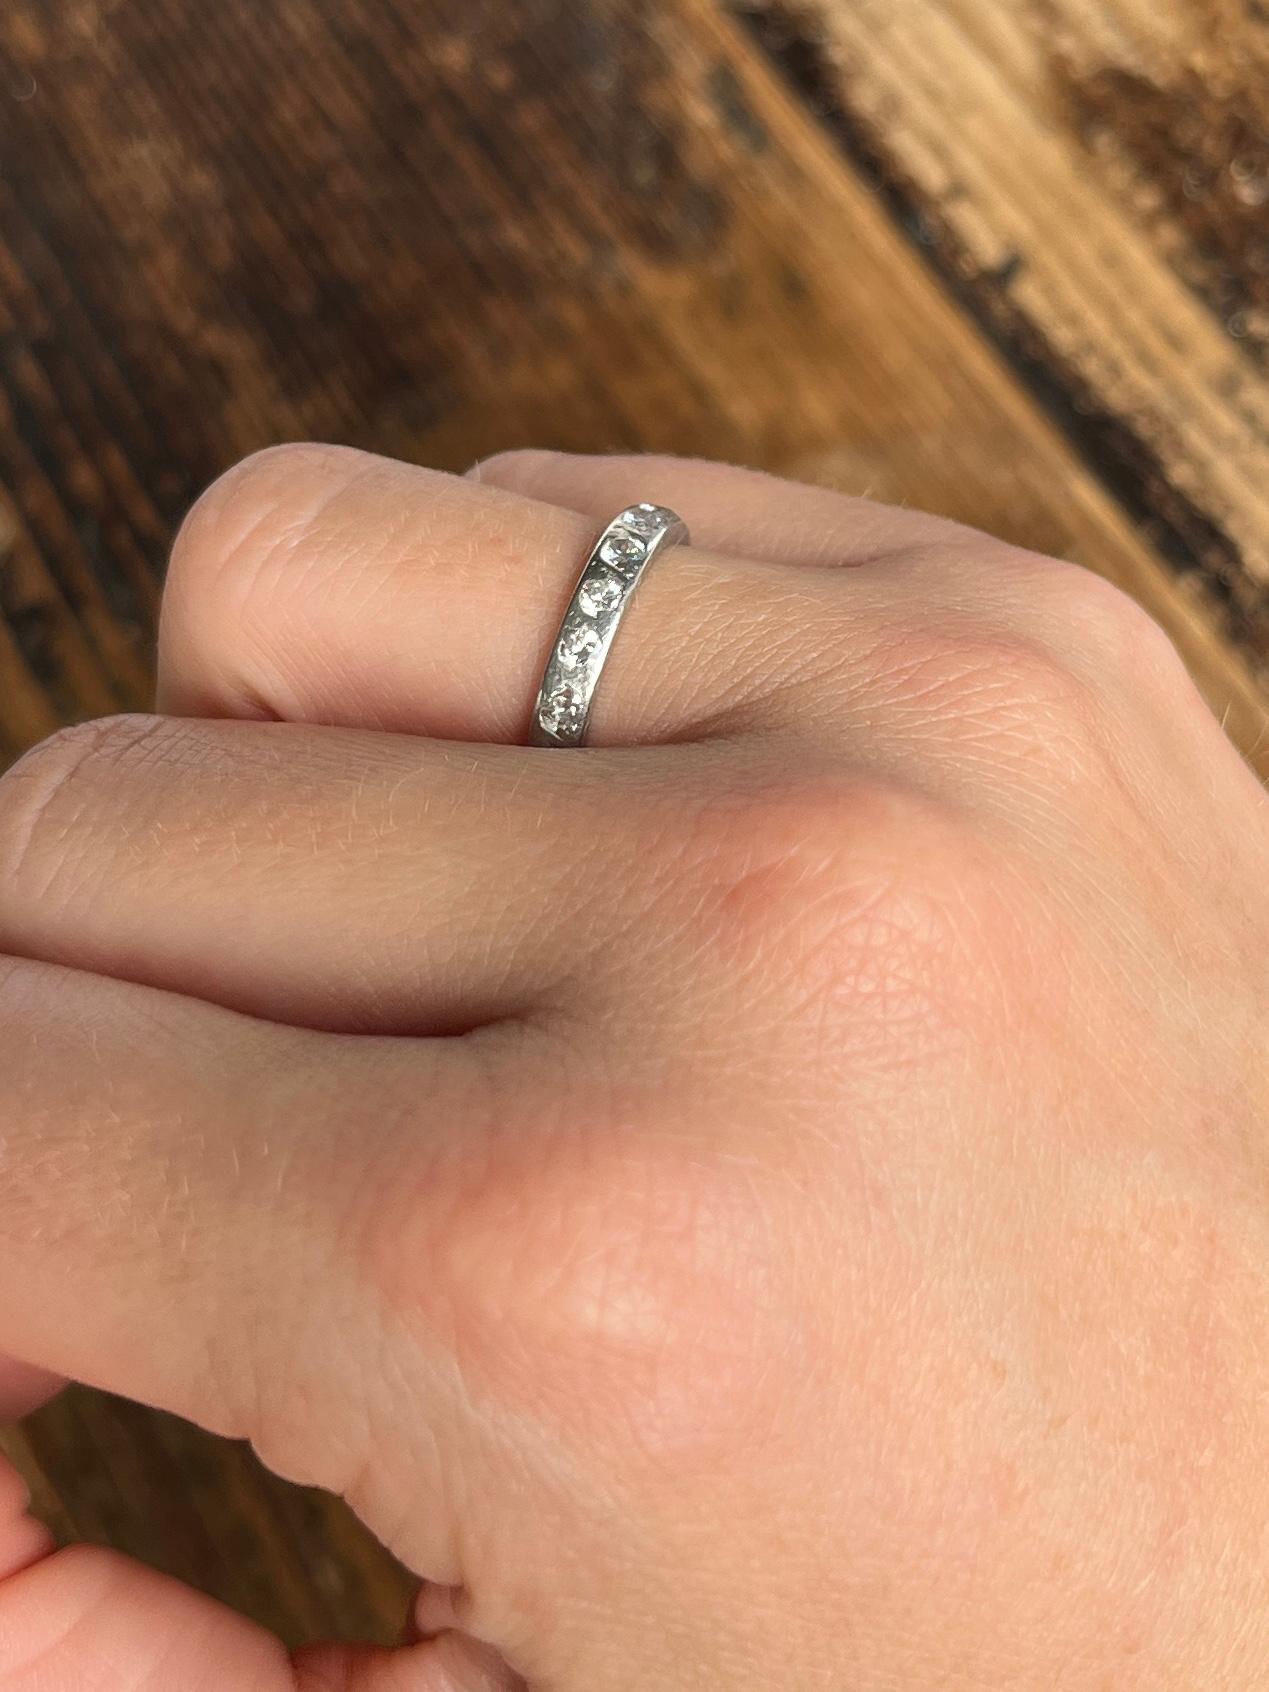 The most beautiful and sparkling eternity ring set with diamonds all the way around the platinum band. Dimond total is approx 70pts. 

Ring Size: J 1/2 or 5
Band width: 3mm

Weight: 2.77g